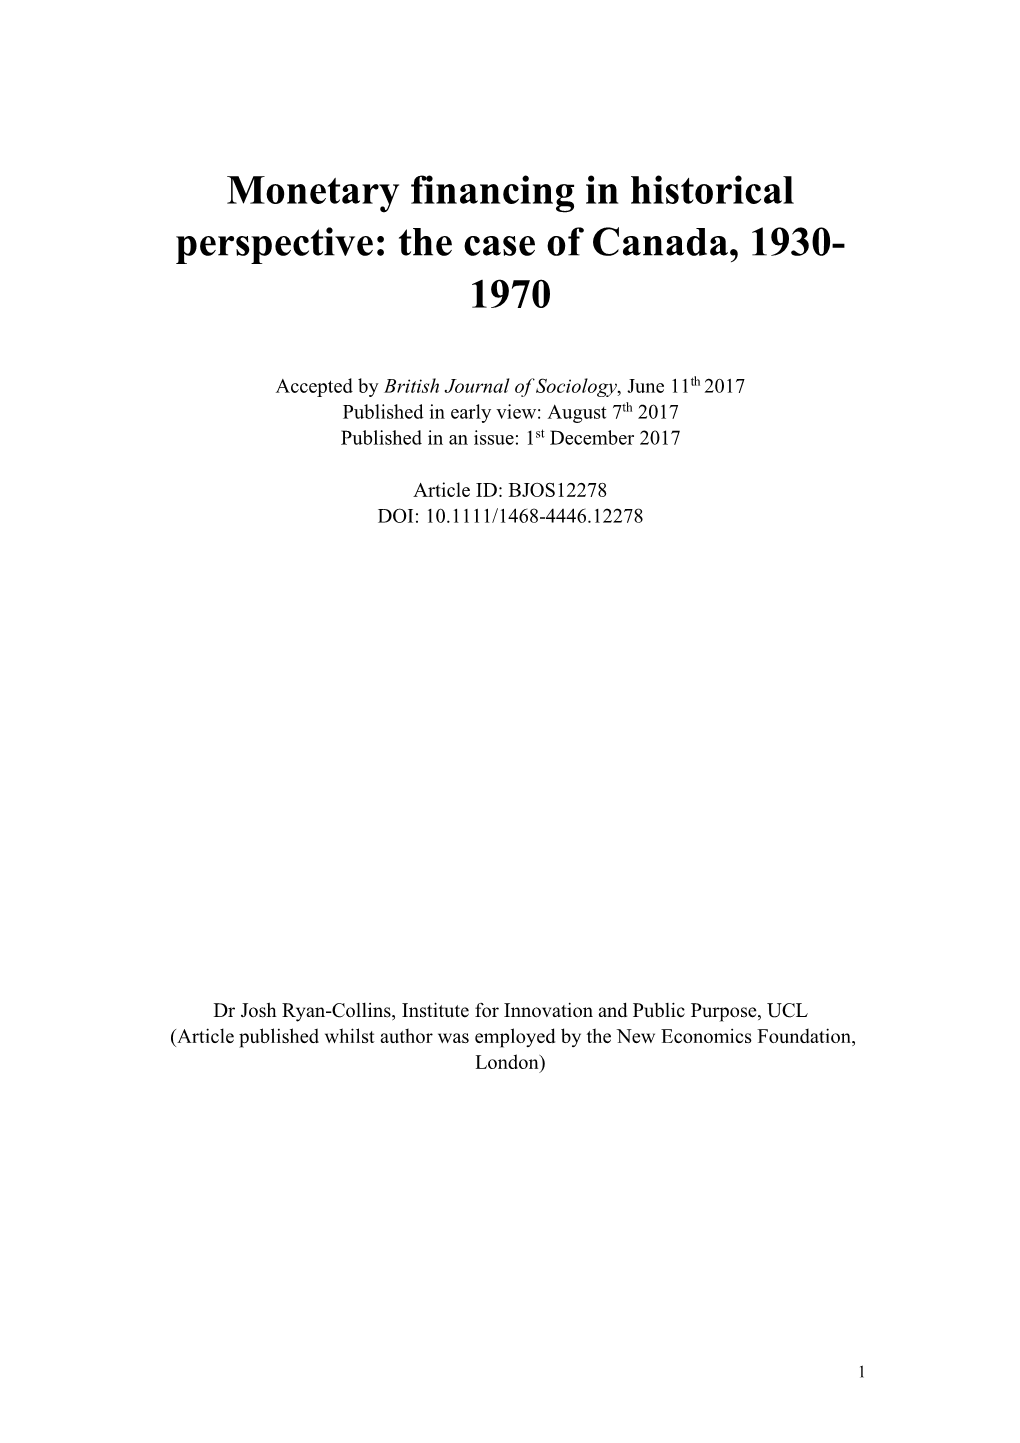 Monetary Financing in Historical Perspective: the Case of Canada, 1930- 1970